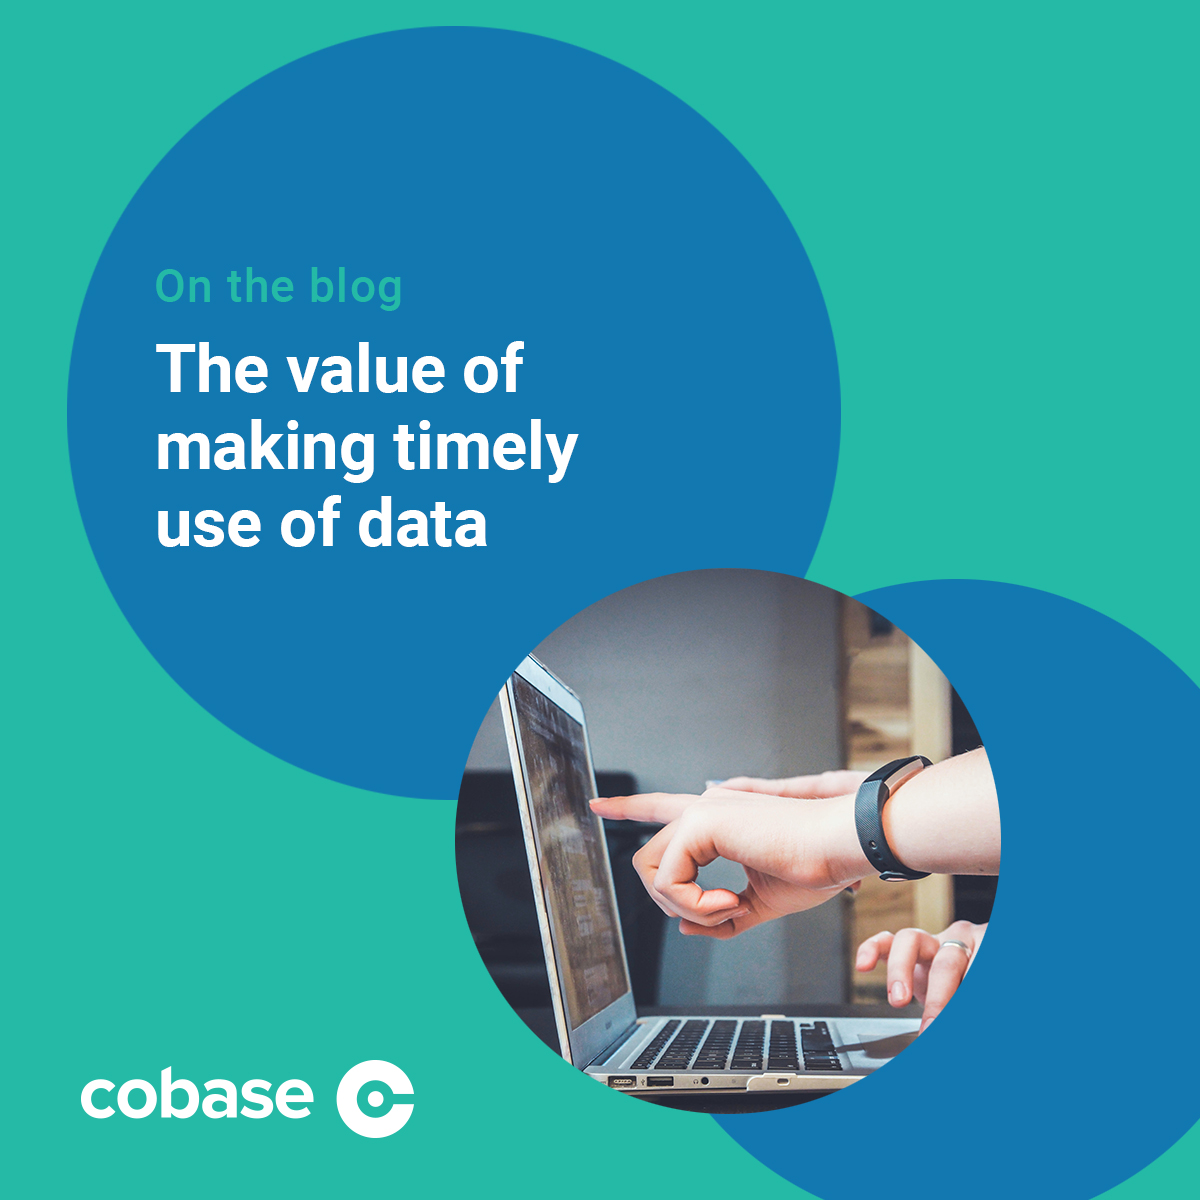 The value of making timely use of data